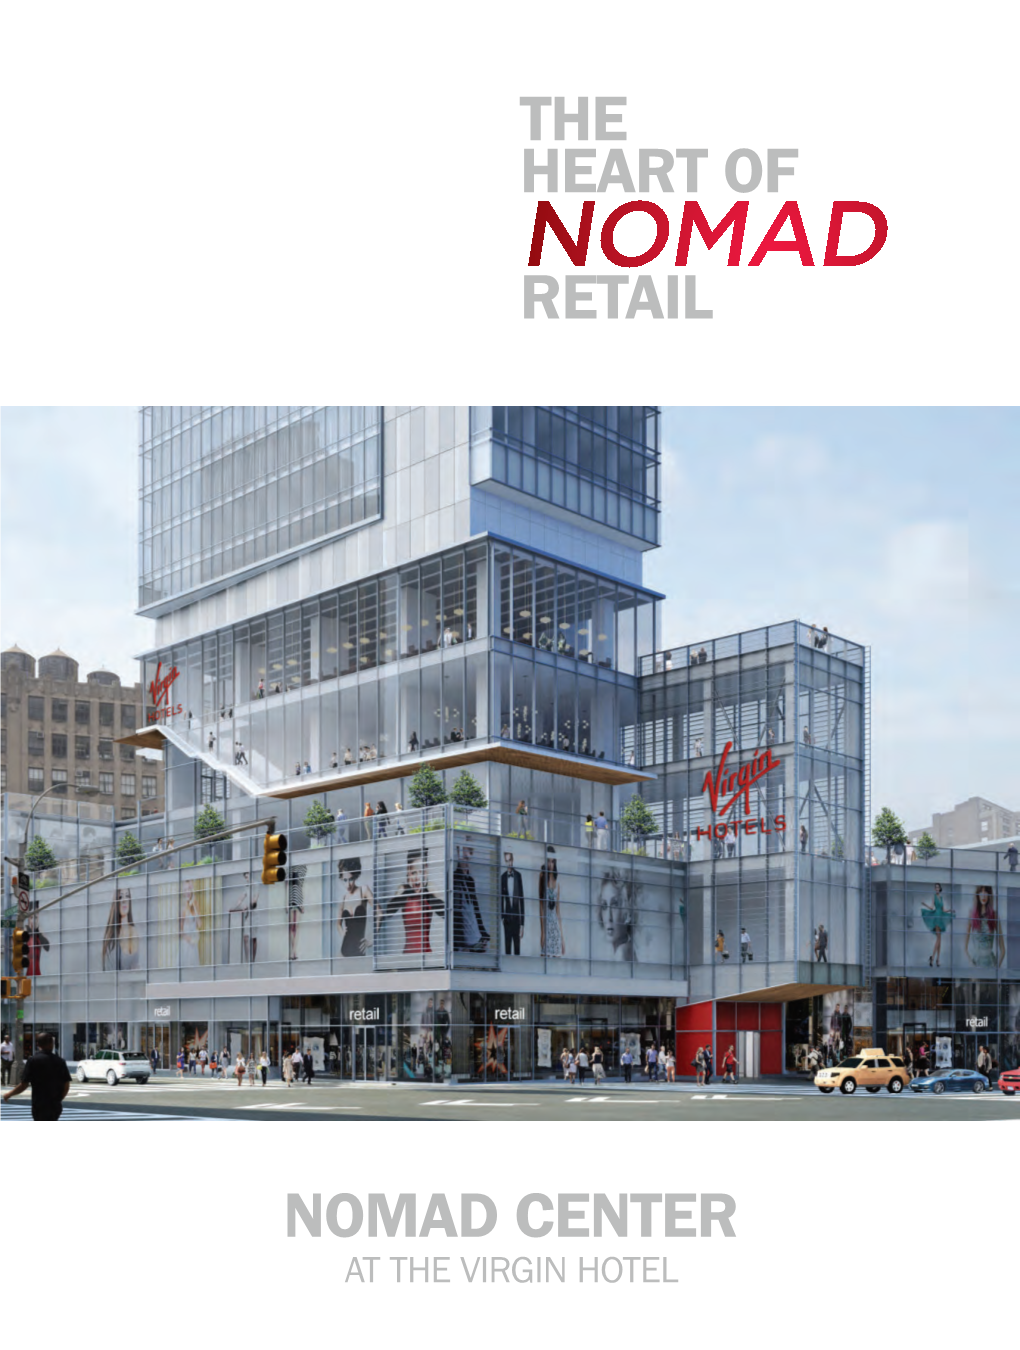 Nomad Center the Heart of Retail